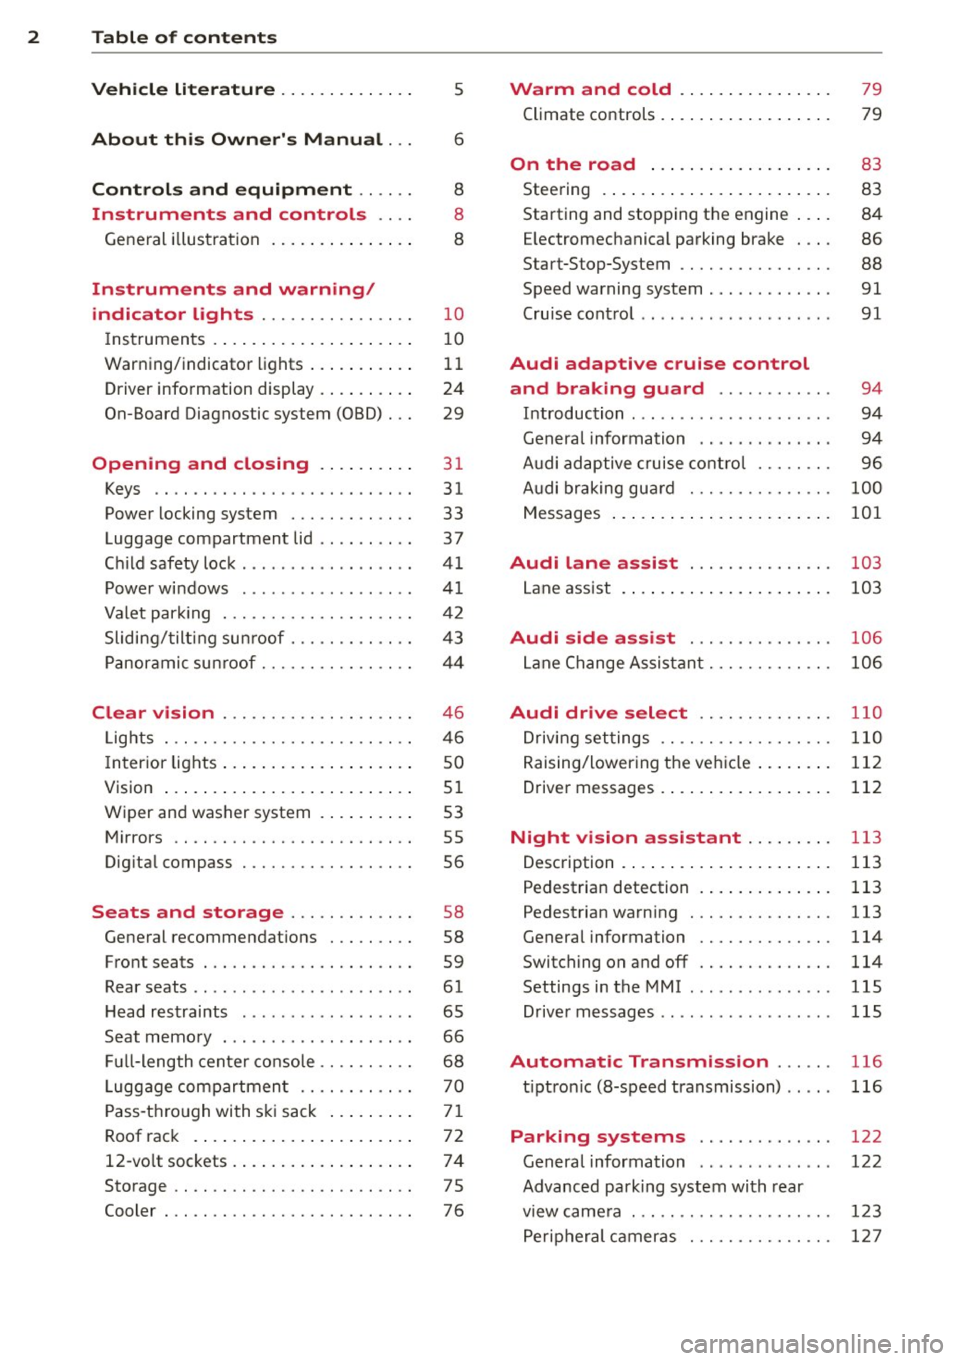 AUDI A8 2014  Owners Manual 2  Table  of  contents Vehicle  literature  .. .. .. .. .. ... . 
5 
About  this  Owners  Manual . . . 6 
Controls  and equipment  .. ...  . 
Ins truments  and  controls  .. . . 
General  illustratio